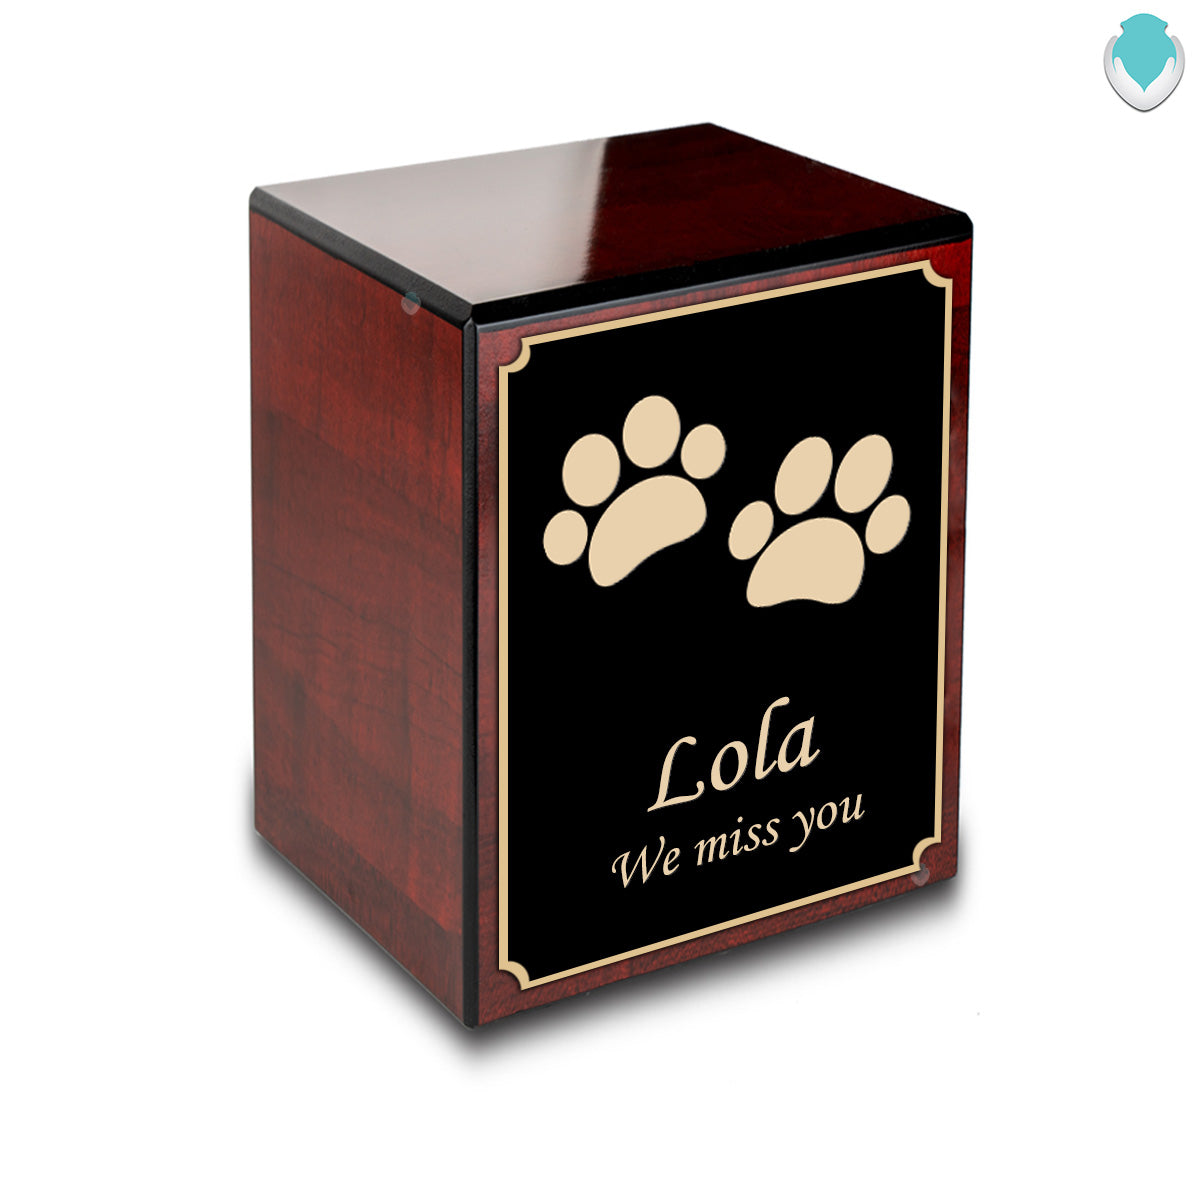 Custom Engraved Heritage Cherry Walking Paws Small Pet Cremation Urn Memorial Box for Ashes